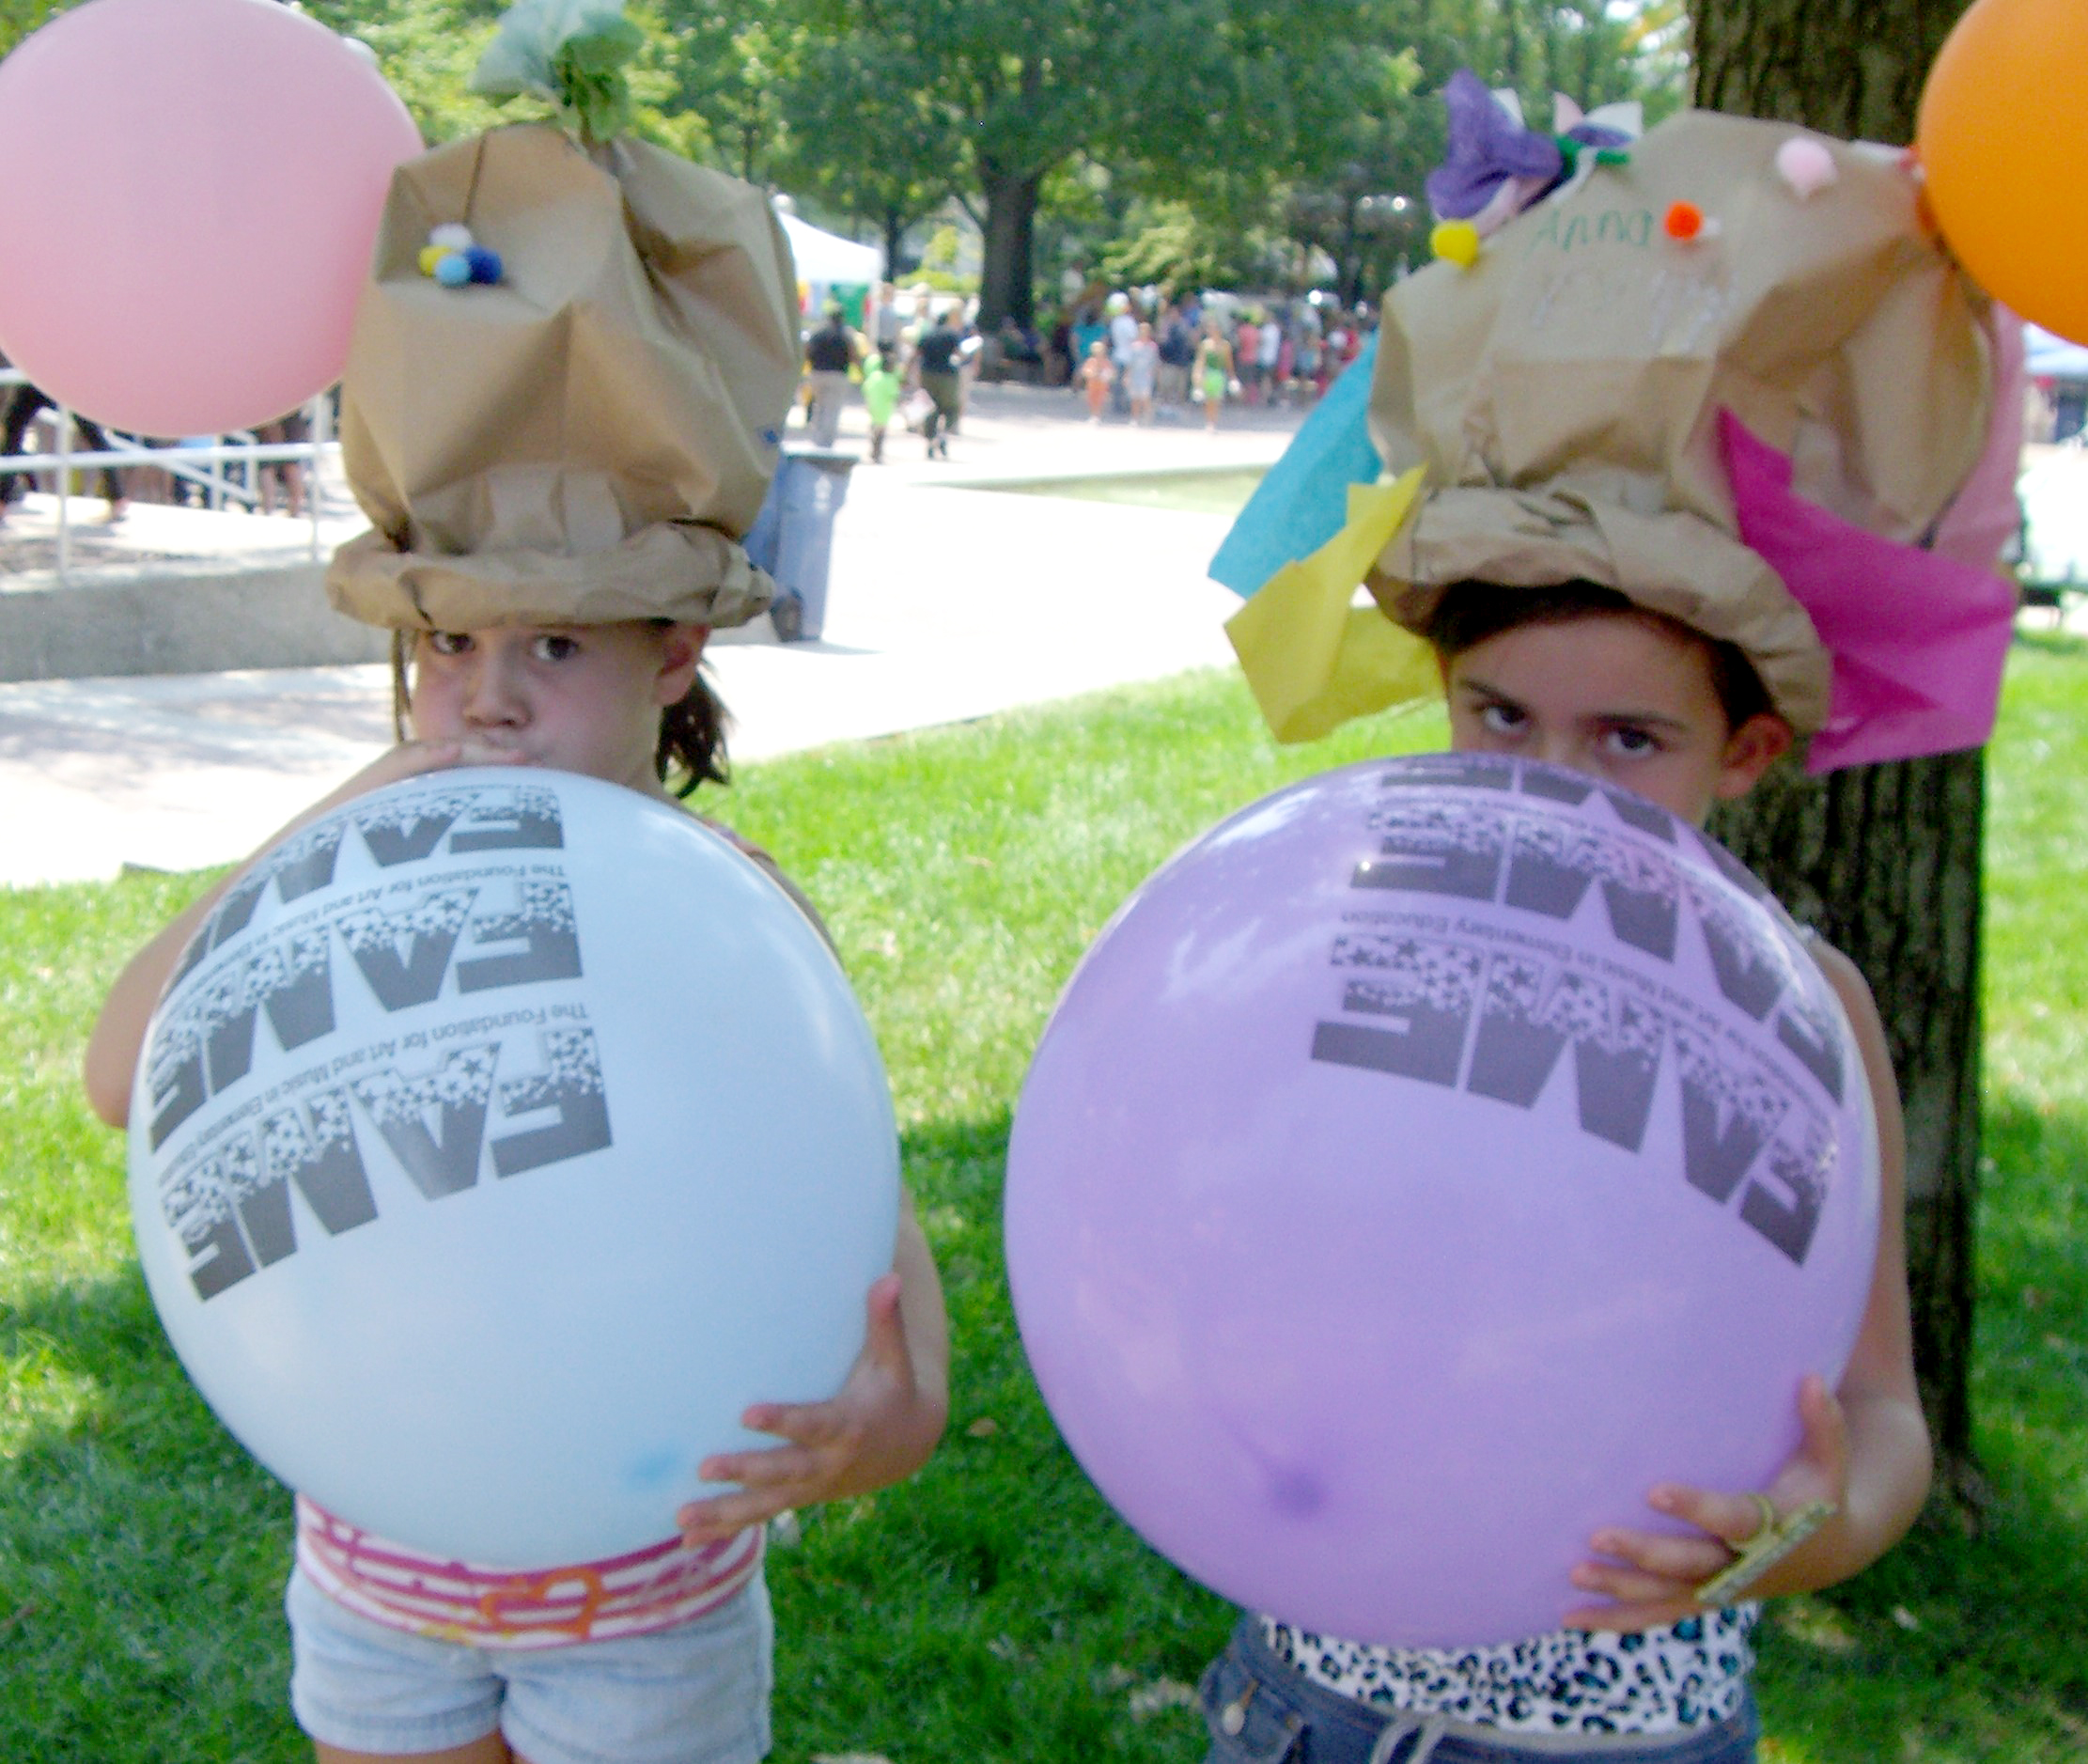 Kids at Taste of the Arts with FAME Balloons